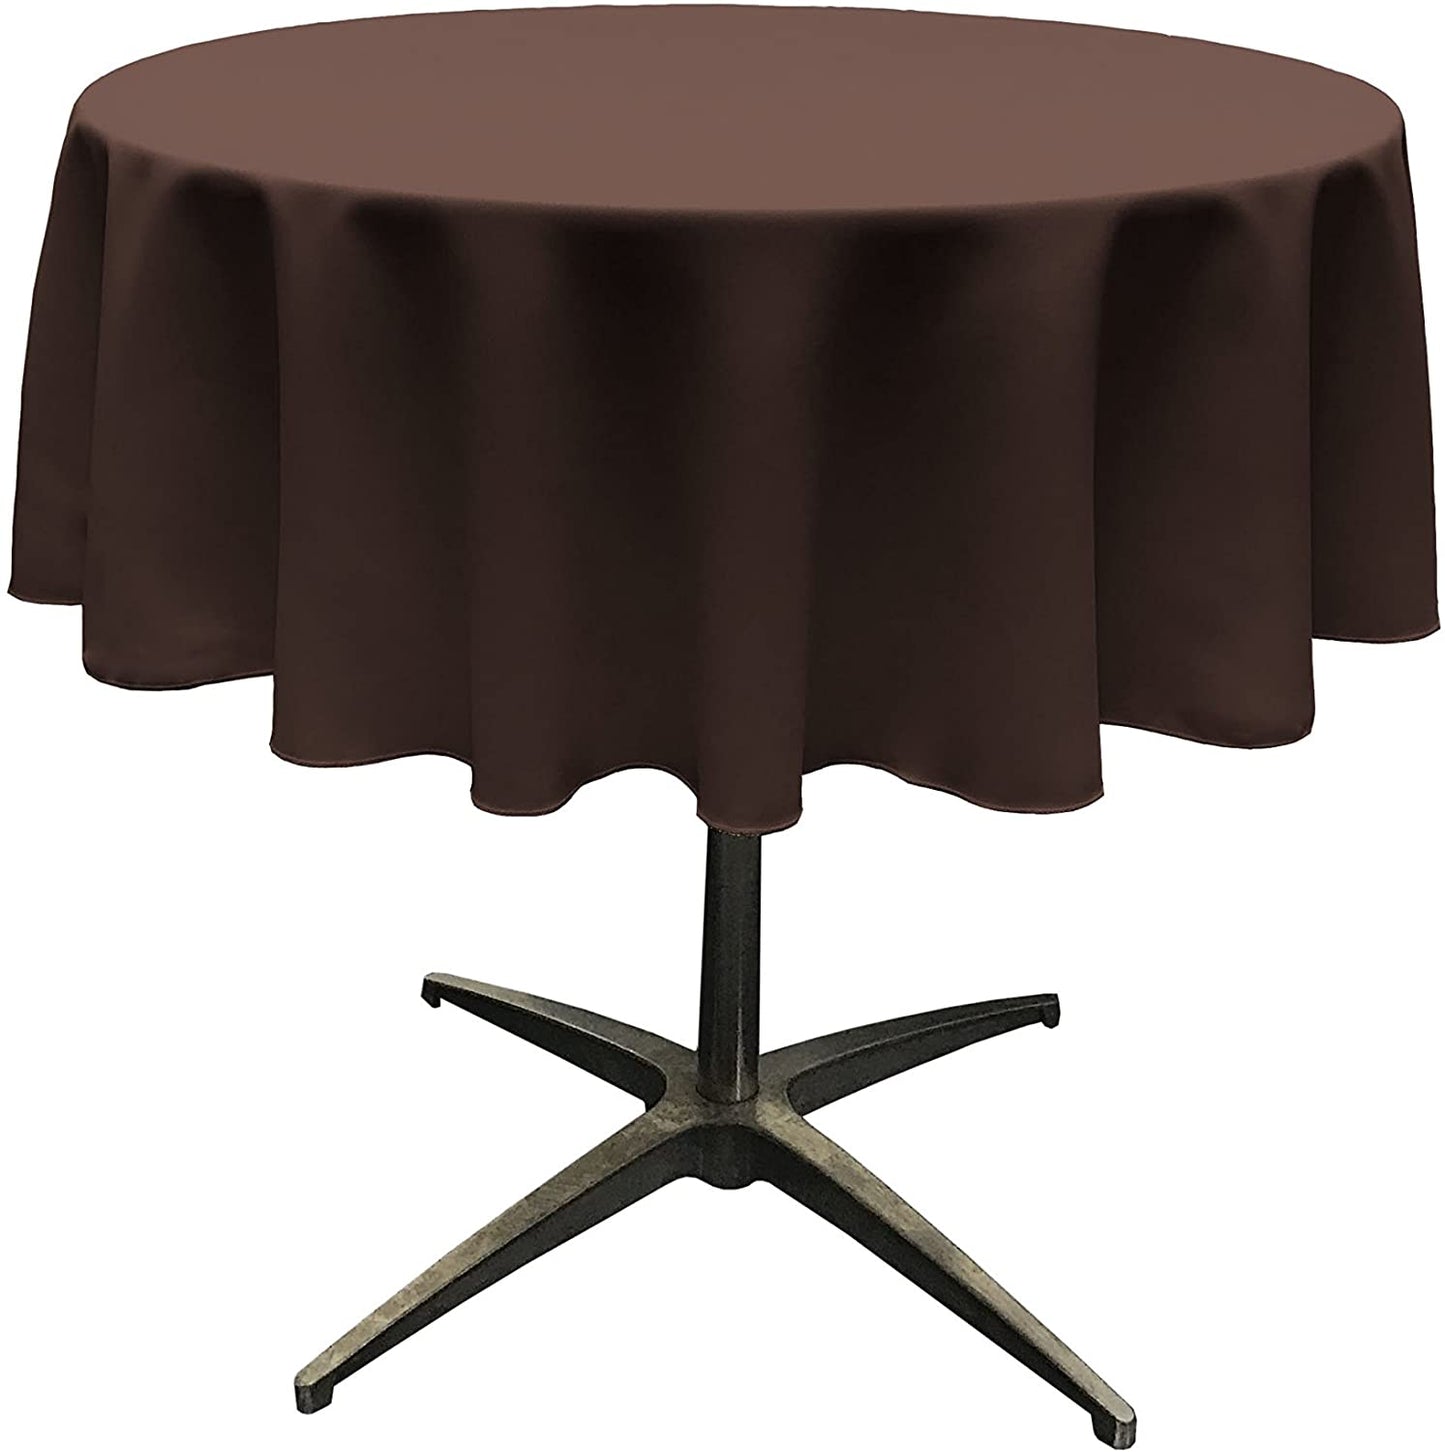 Polyester Poplin Washable Round Tablecloth, Stain and Wrinkle Resistant Table Cover Brown